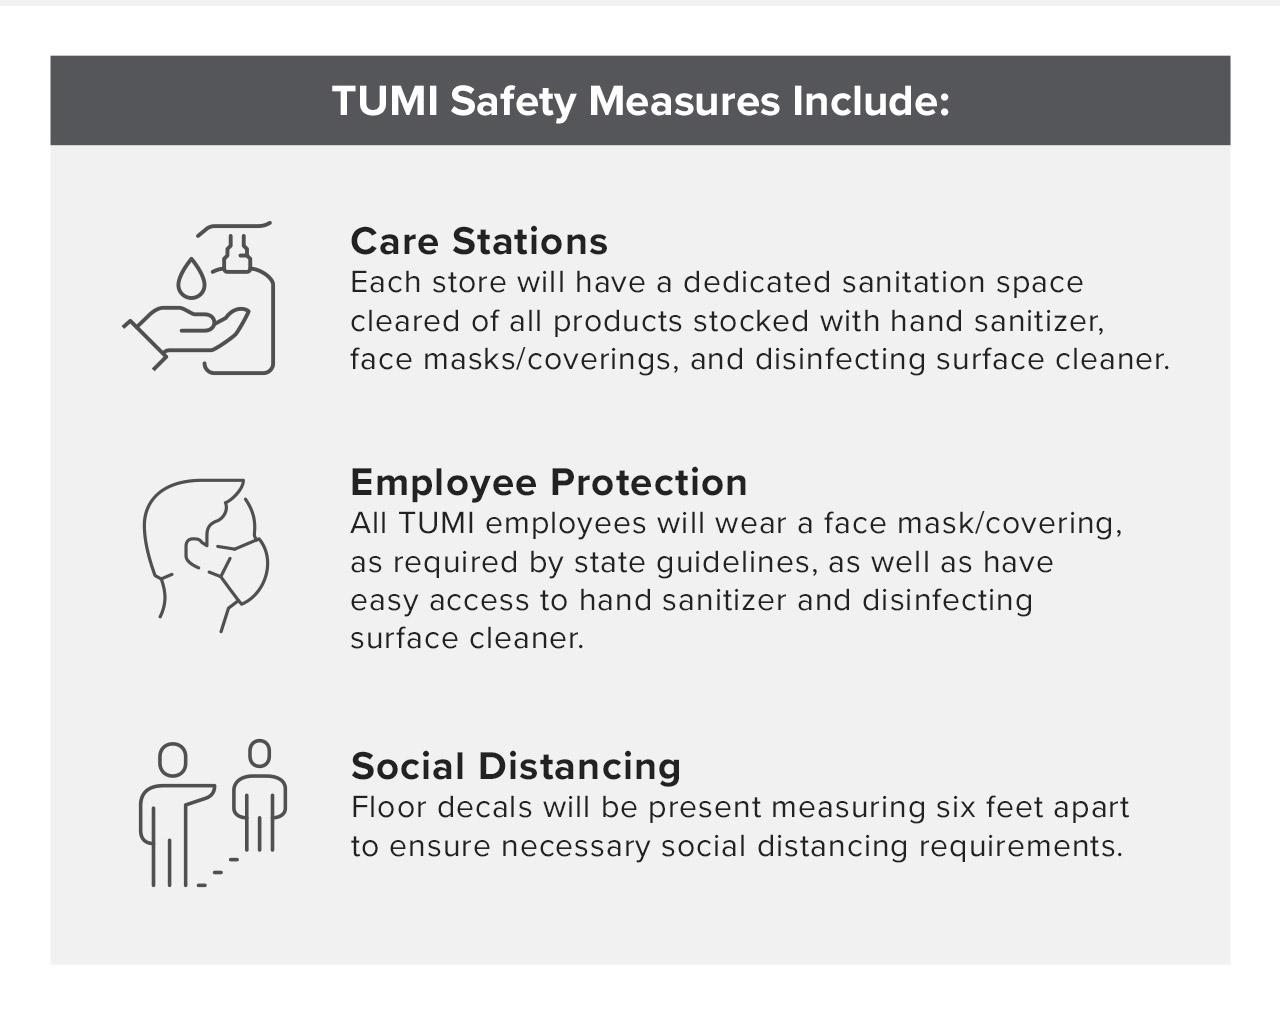 TUMI Safety Measres Include: Care Stations. Employee Protection. Social Distancing.